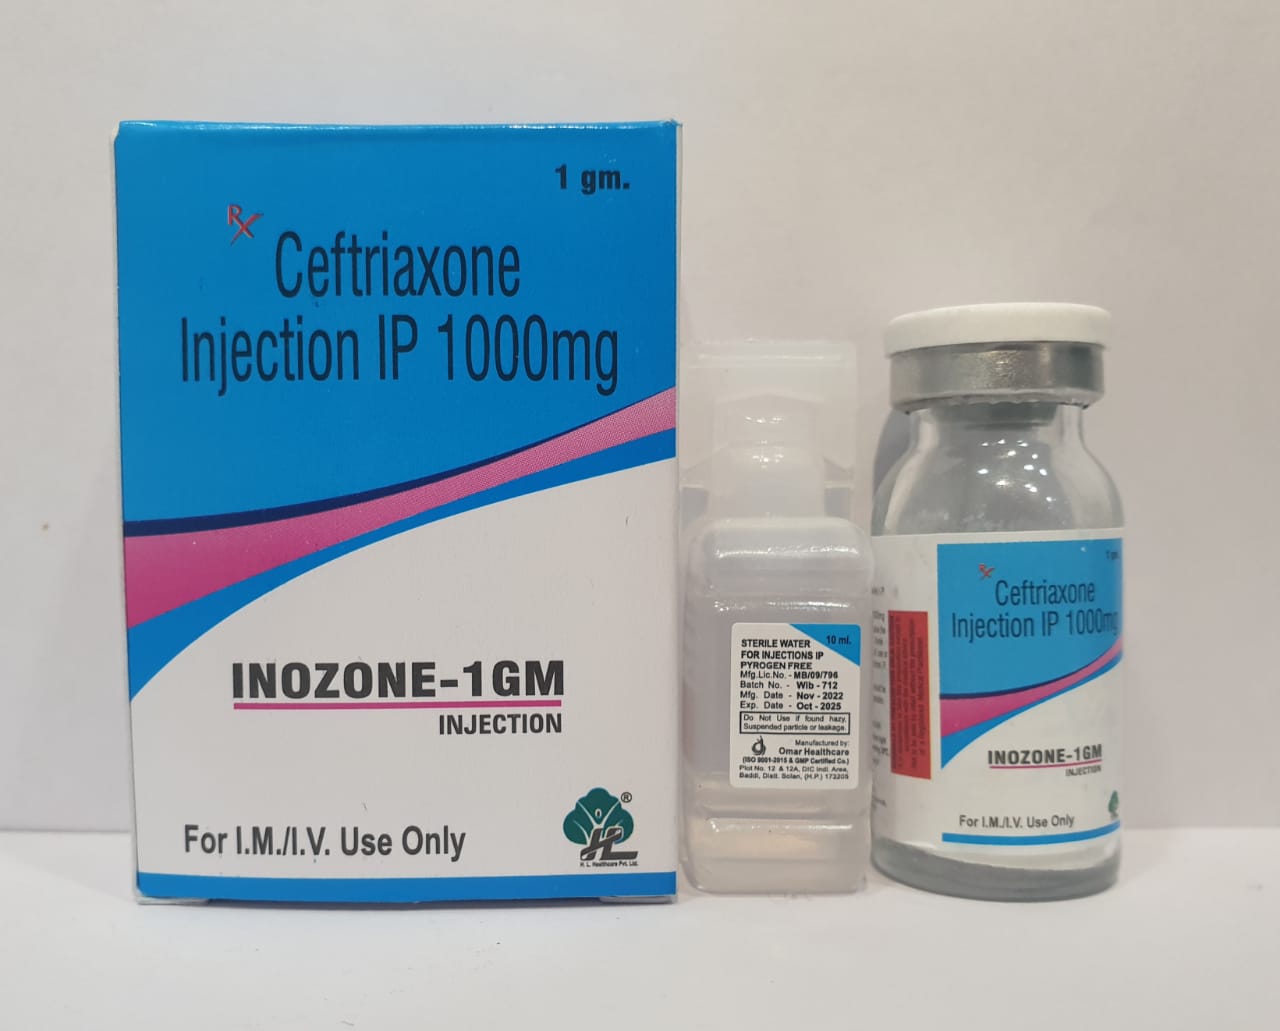 Ceftriaxone 1000mg injection